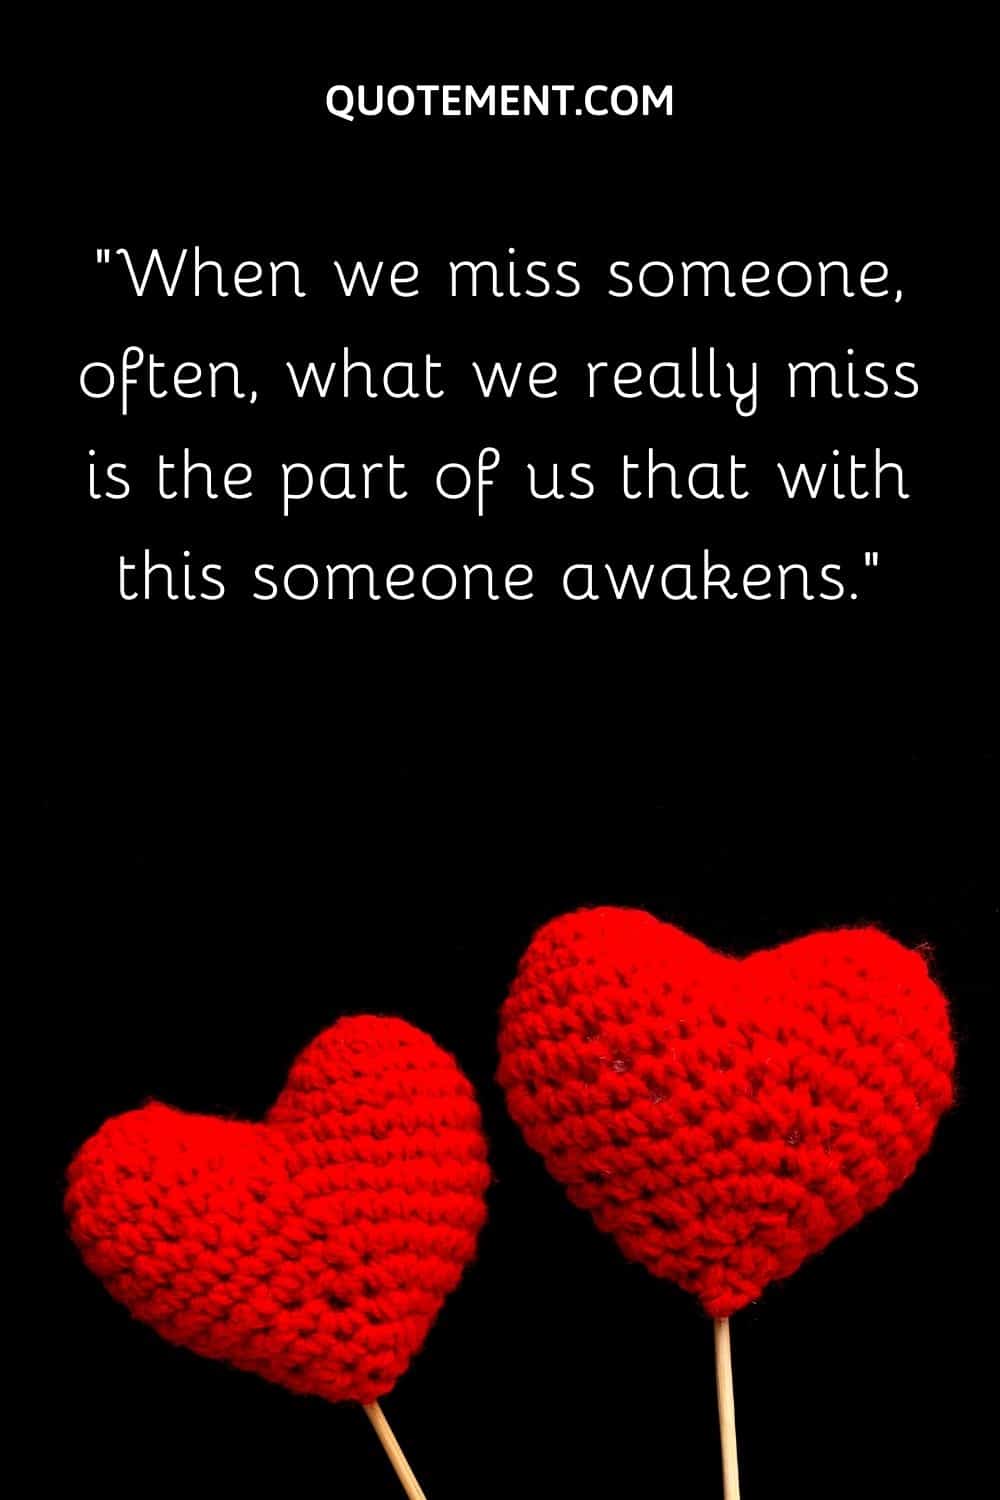 When we miss someone, often, what we really miss is the part of us that with this someone awakens.